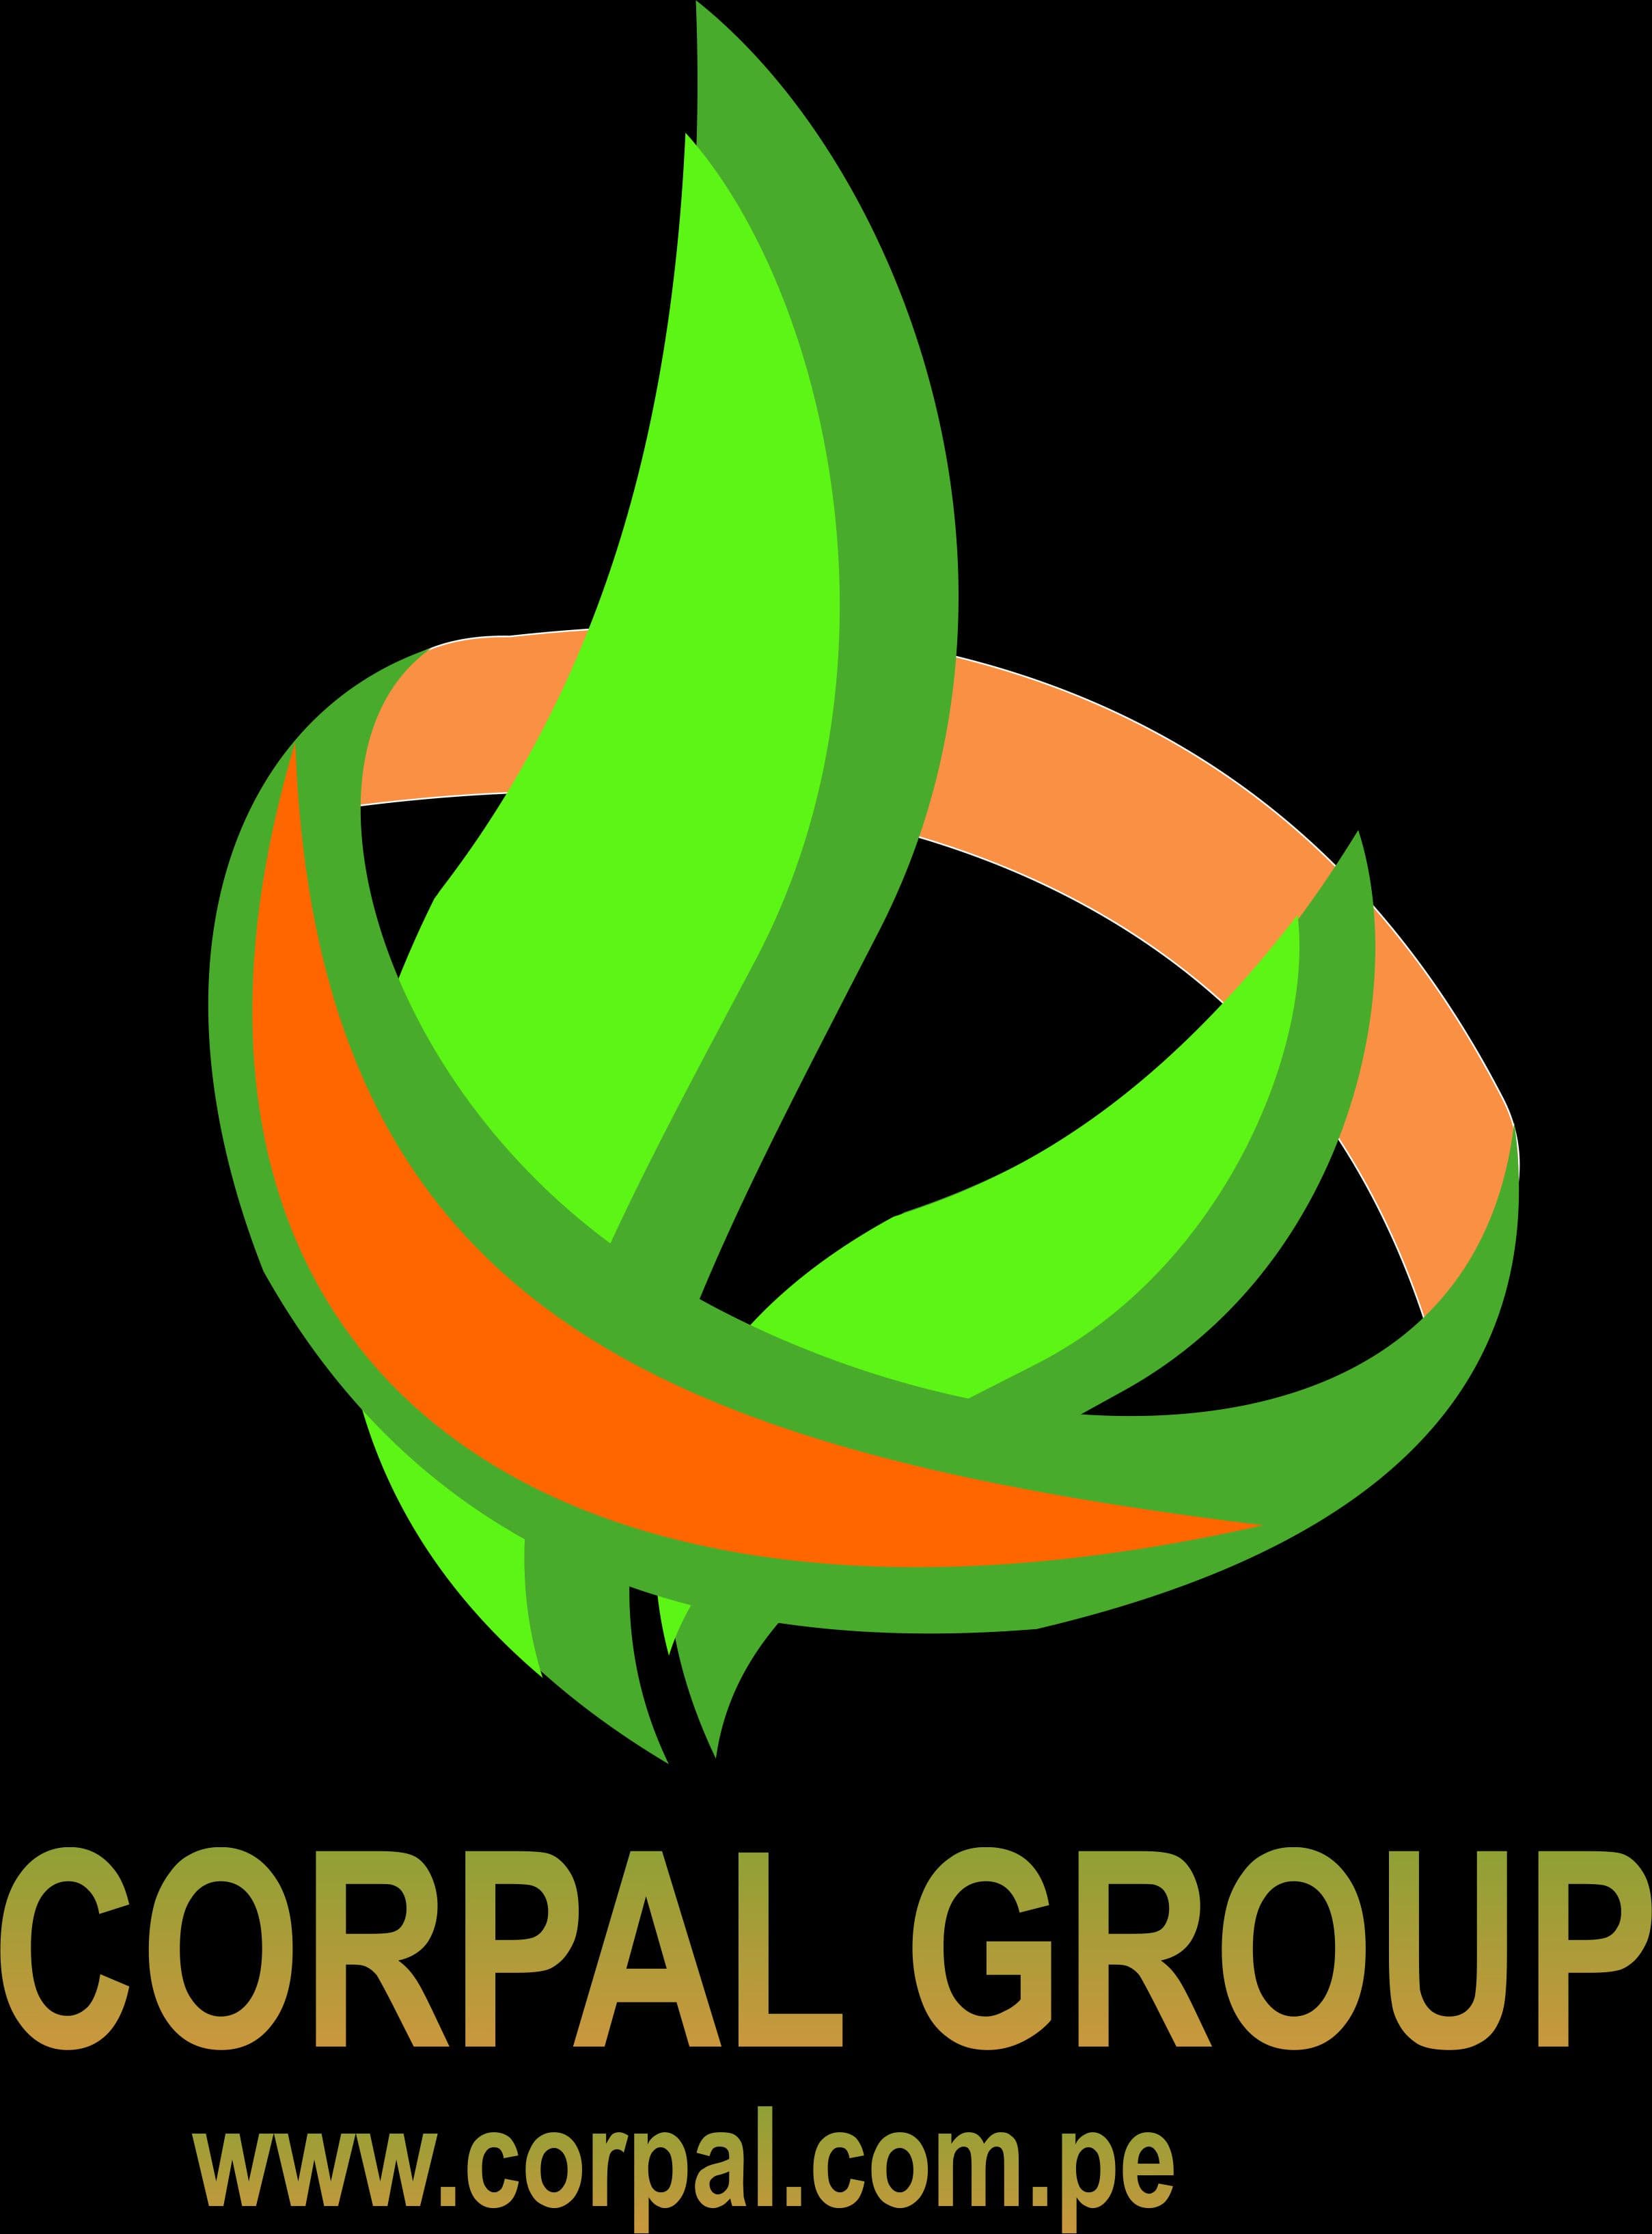 CORPAL GROUP TOCACHE S.A.C.